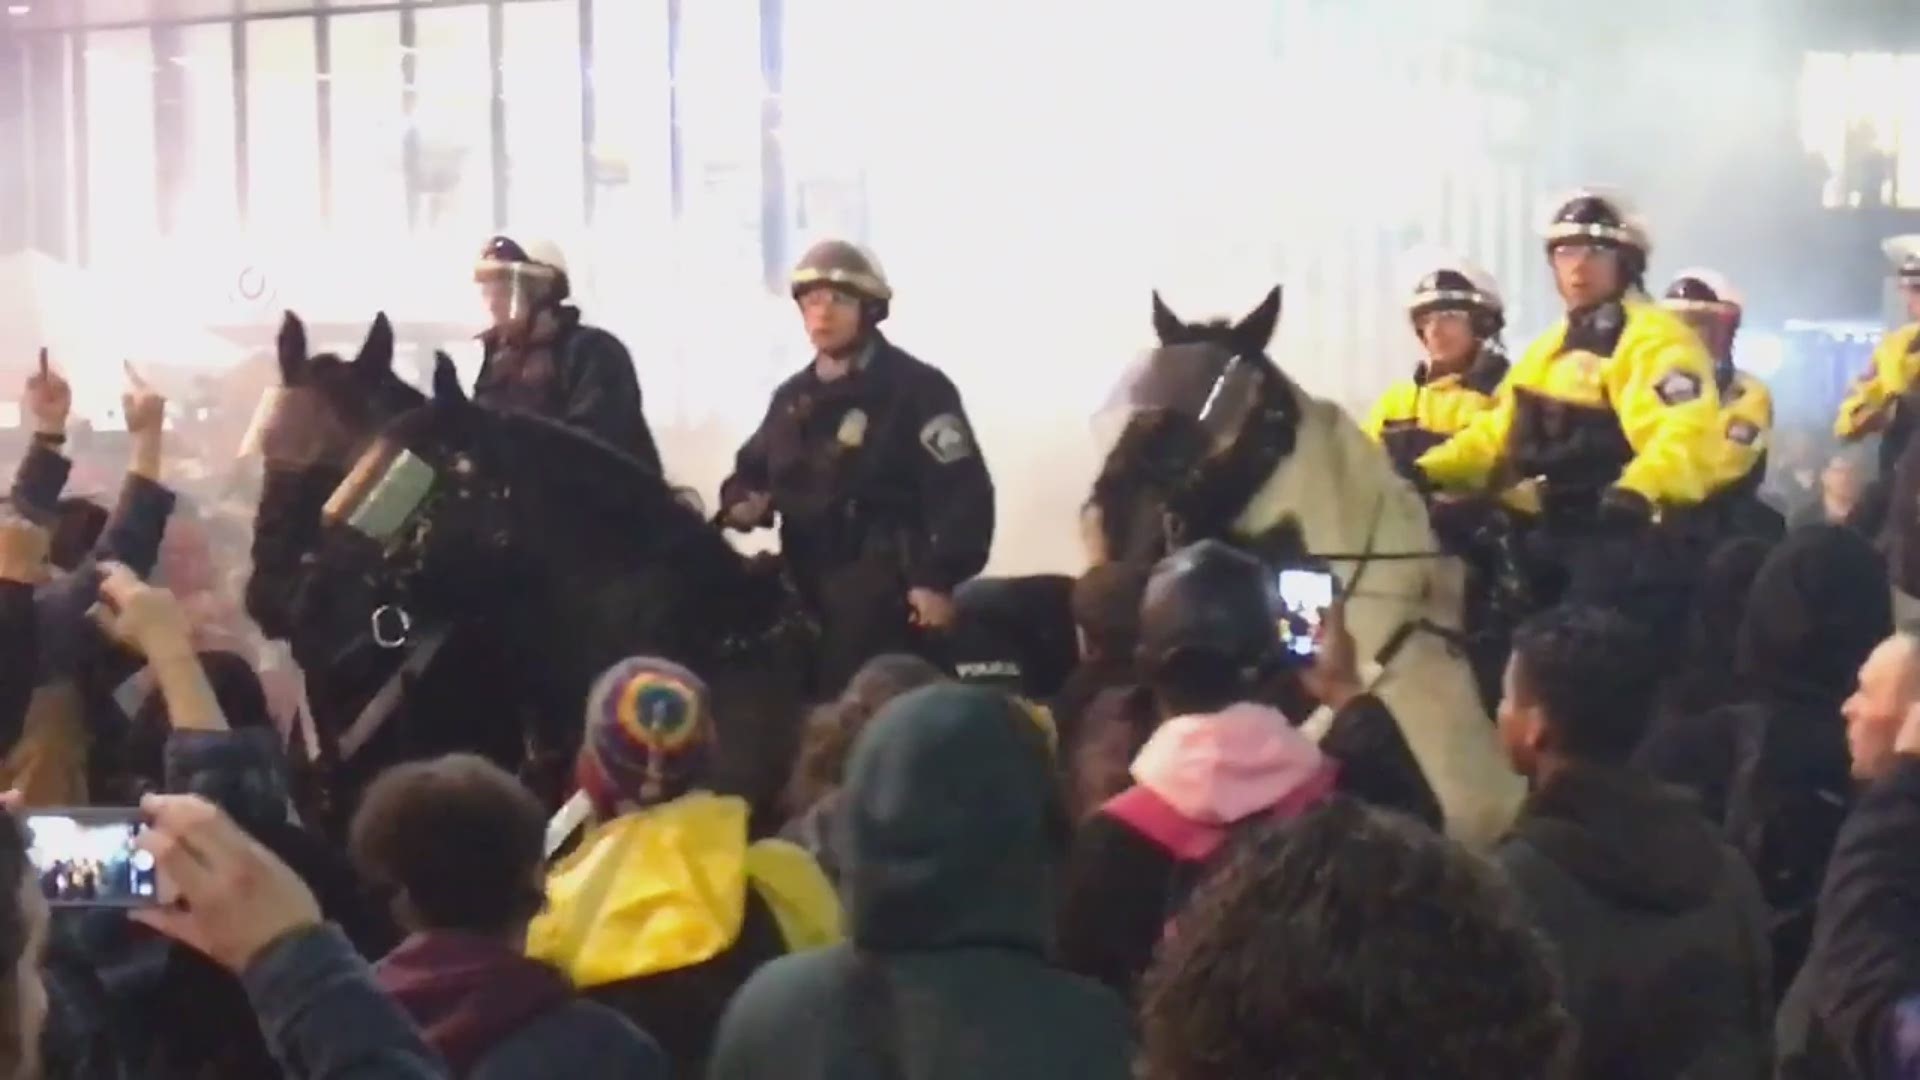 Police on horses in the crowds outside Target Center during the Trump rally in Minneapolis